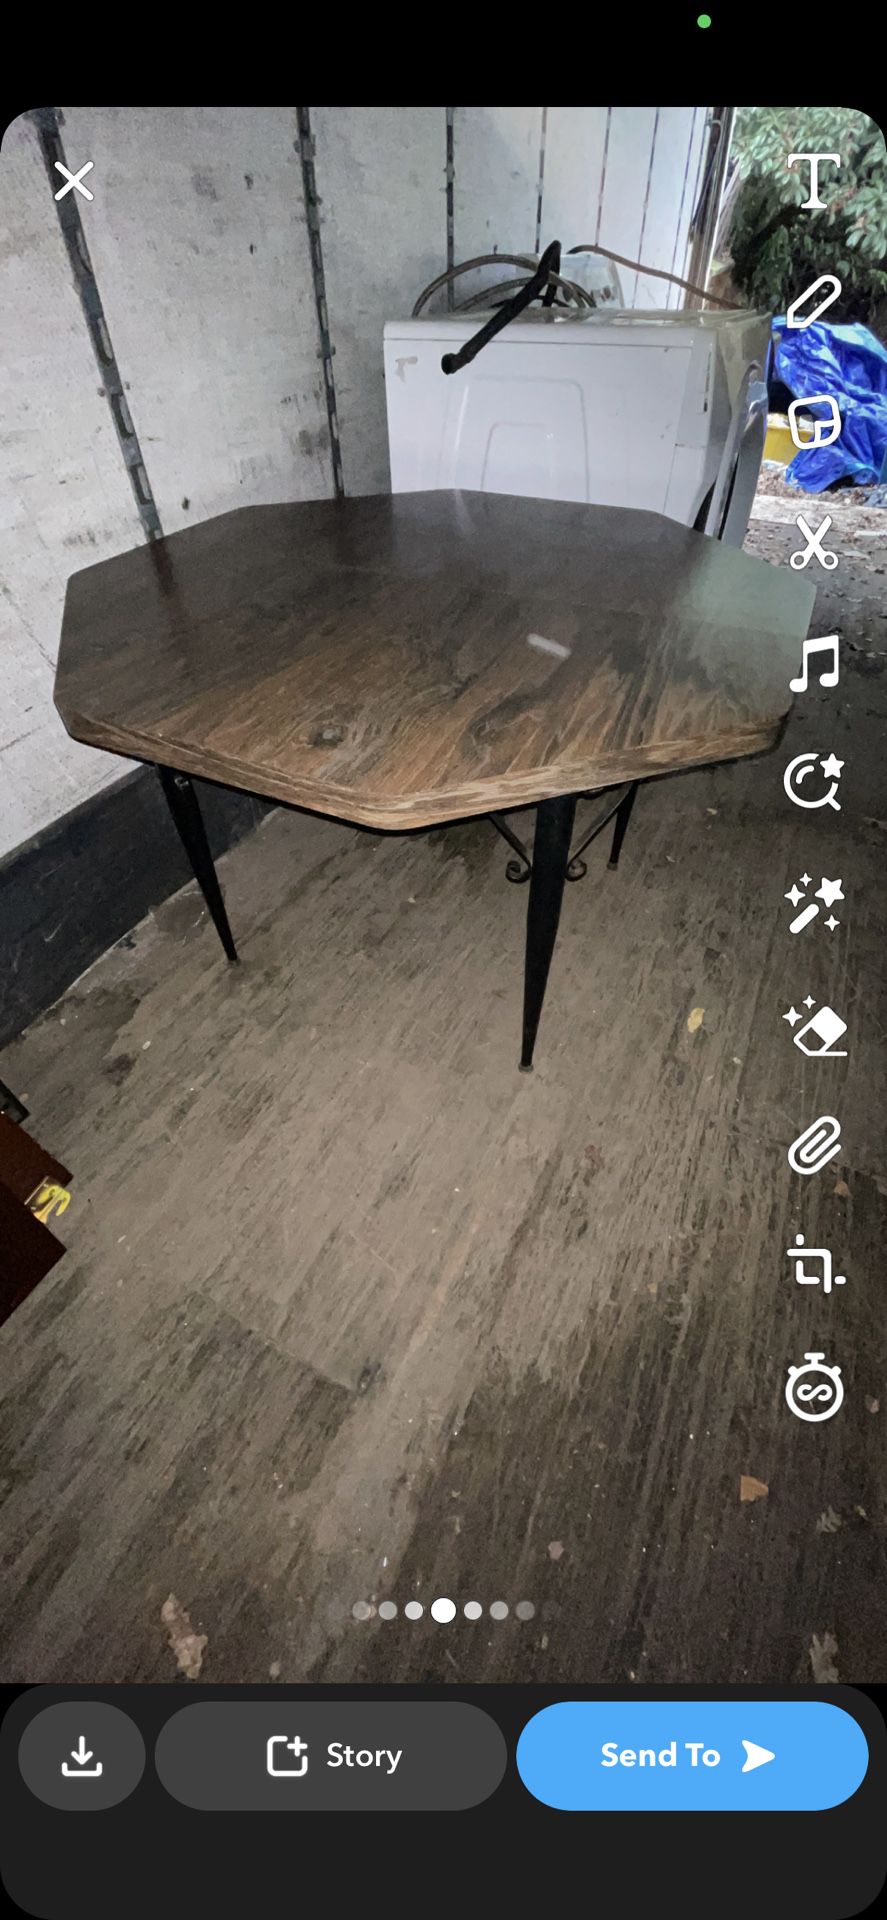 Old Table 